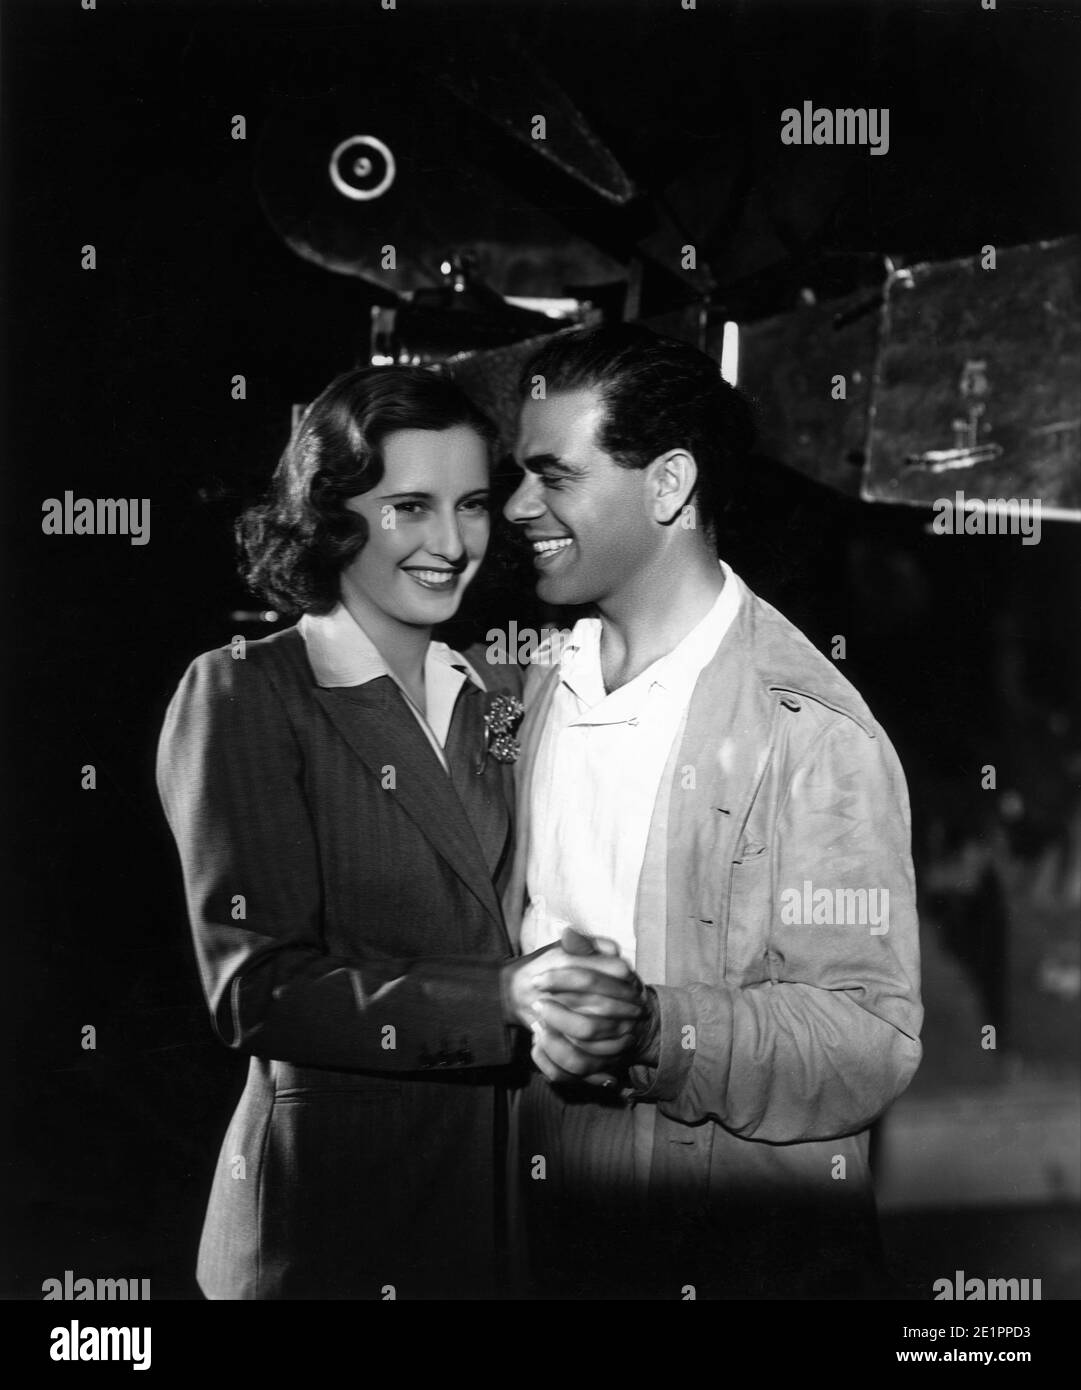 BARBARA STANWYCK visits Director FRANK CAPRA on the set of his new film MR. SMITH GOES TO WASHINGTON 1939 director FRANK CAPRA story Lewis R. Foster screenplay Sidney Buchman Columbia Pictures Stock Photo